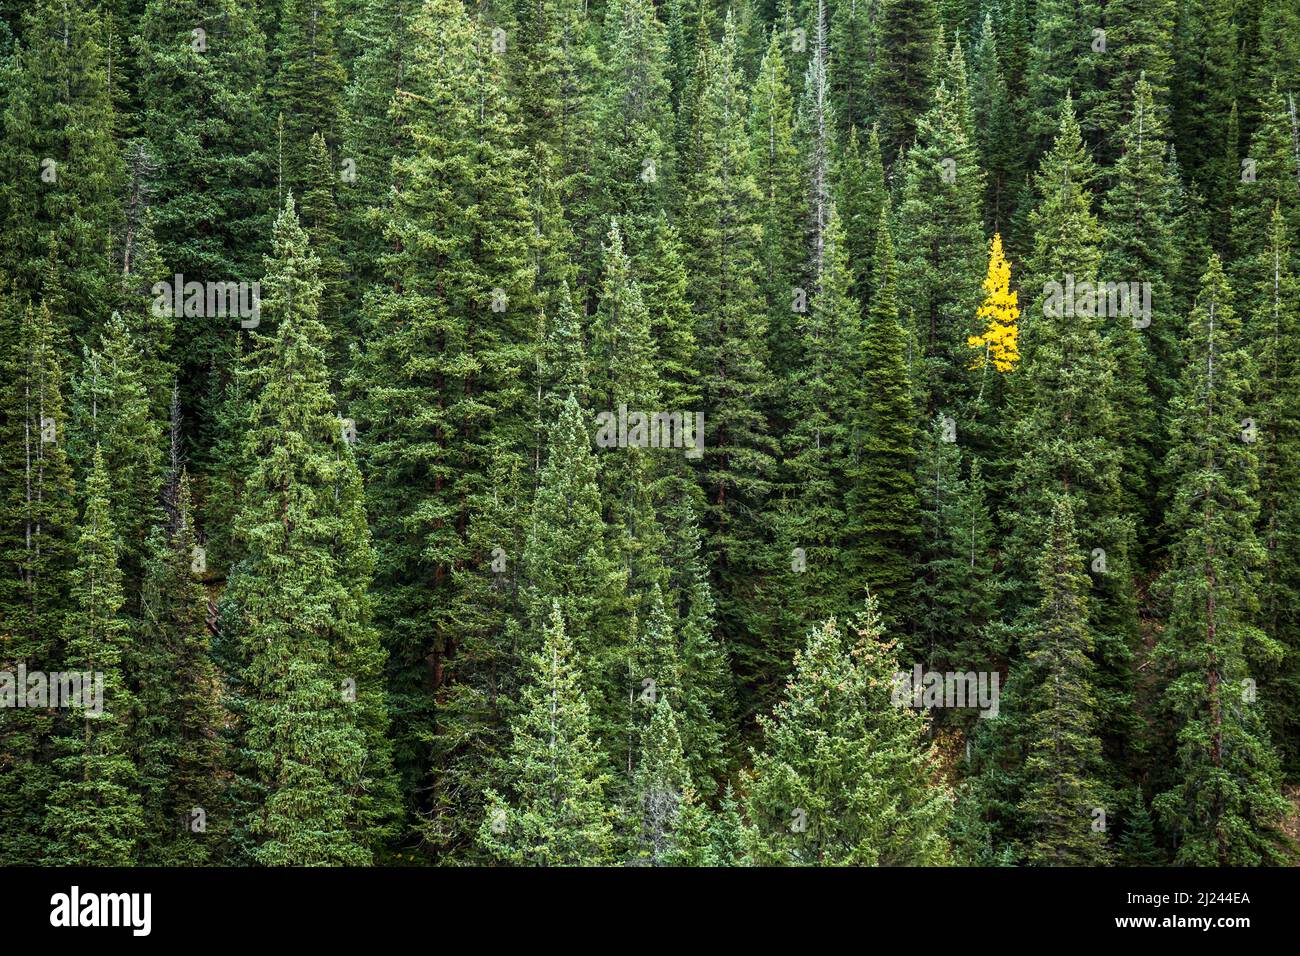 One small aspen tree stands bright yellow in contrast to many pines surrounding it. Stand out alone. Stock Photo